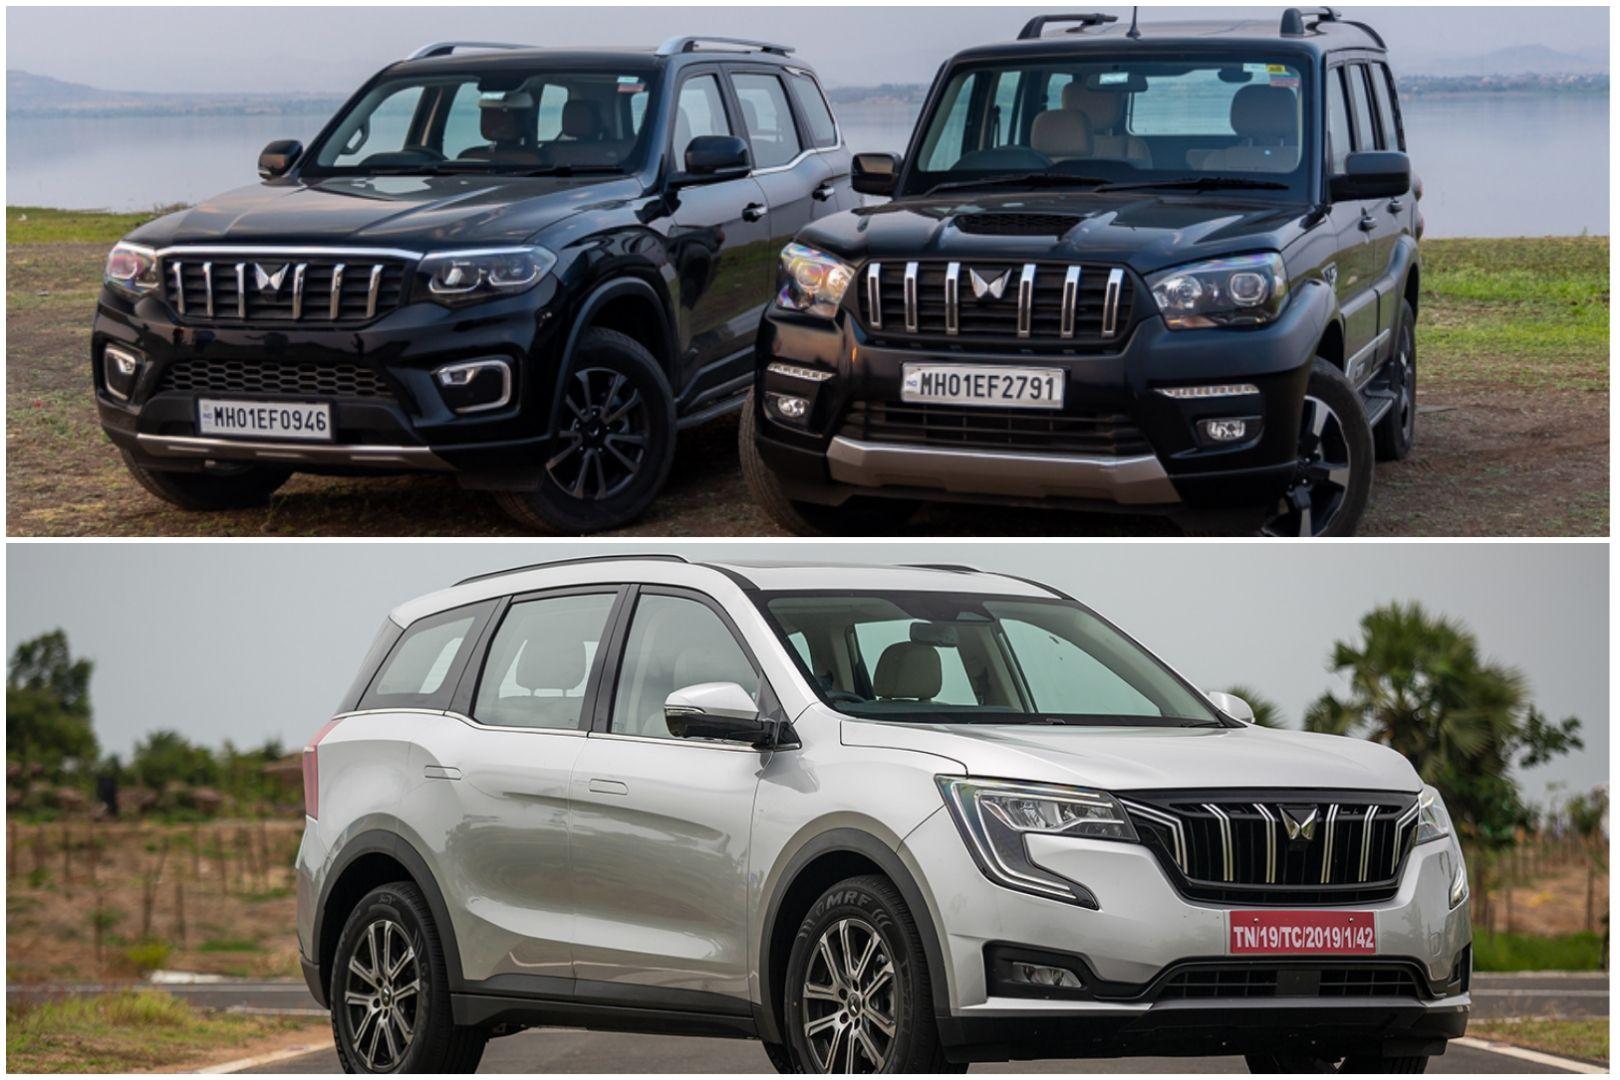 Mahindra Scorpio N, Scorpio Classic, And XUV700 Account For 69 Percent Of The Carmaker’s Current Pending Orders